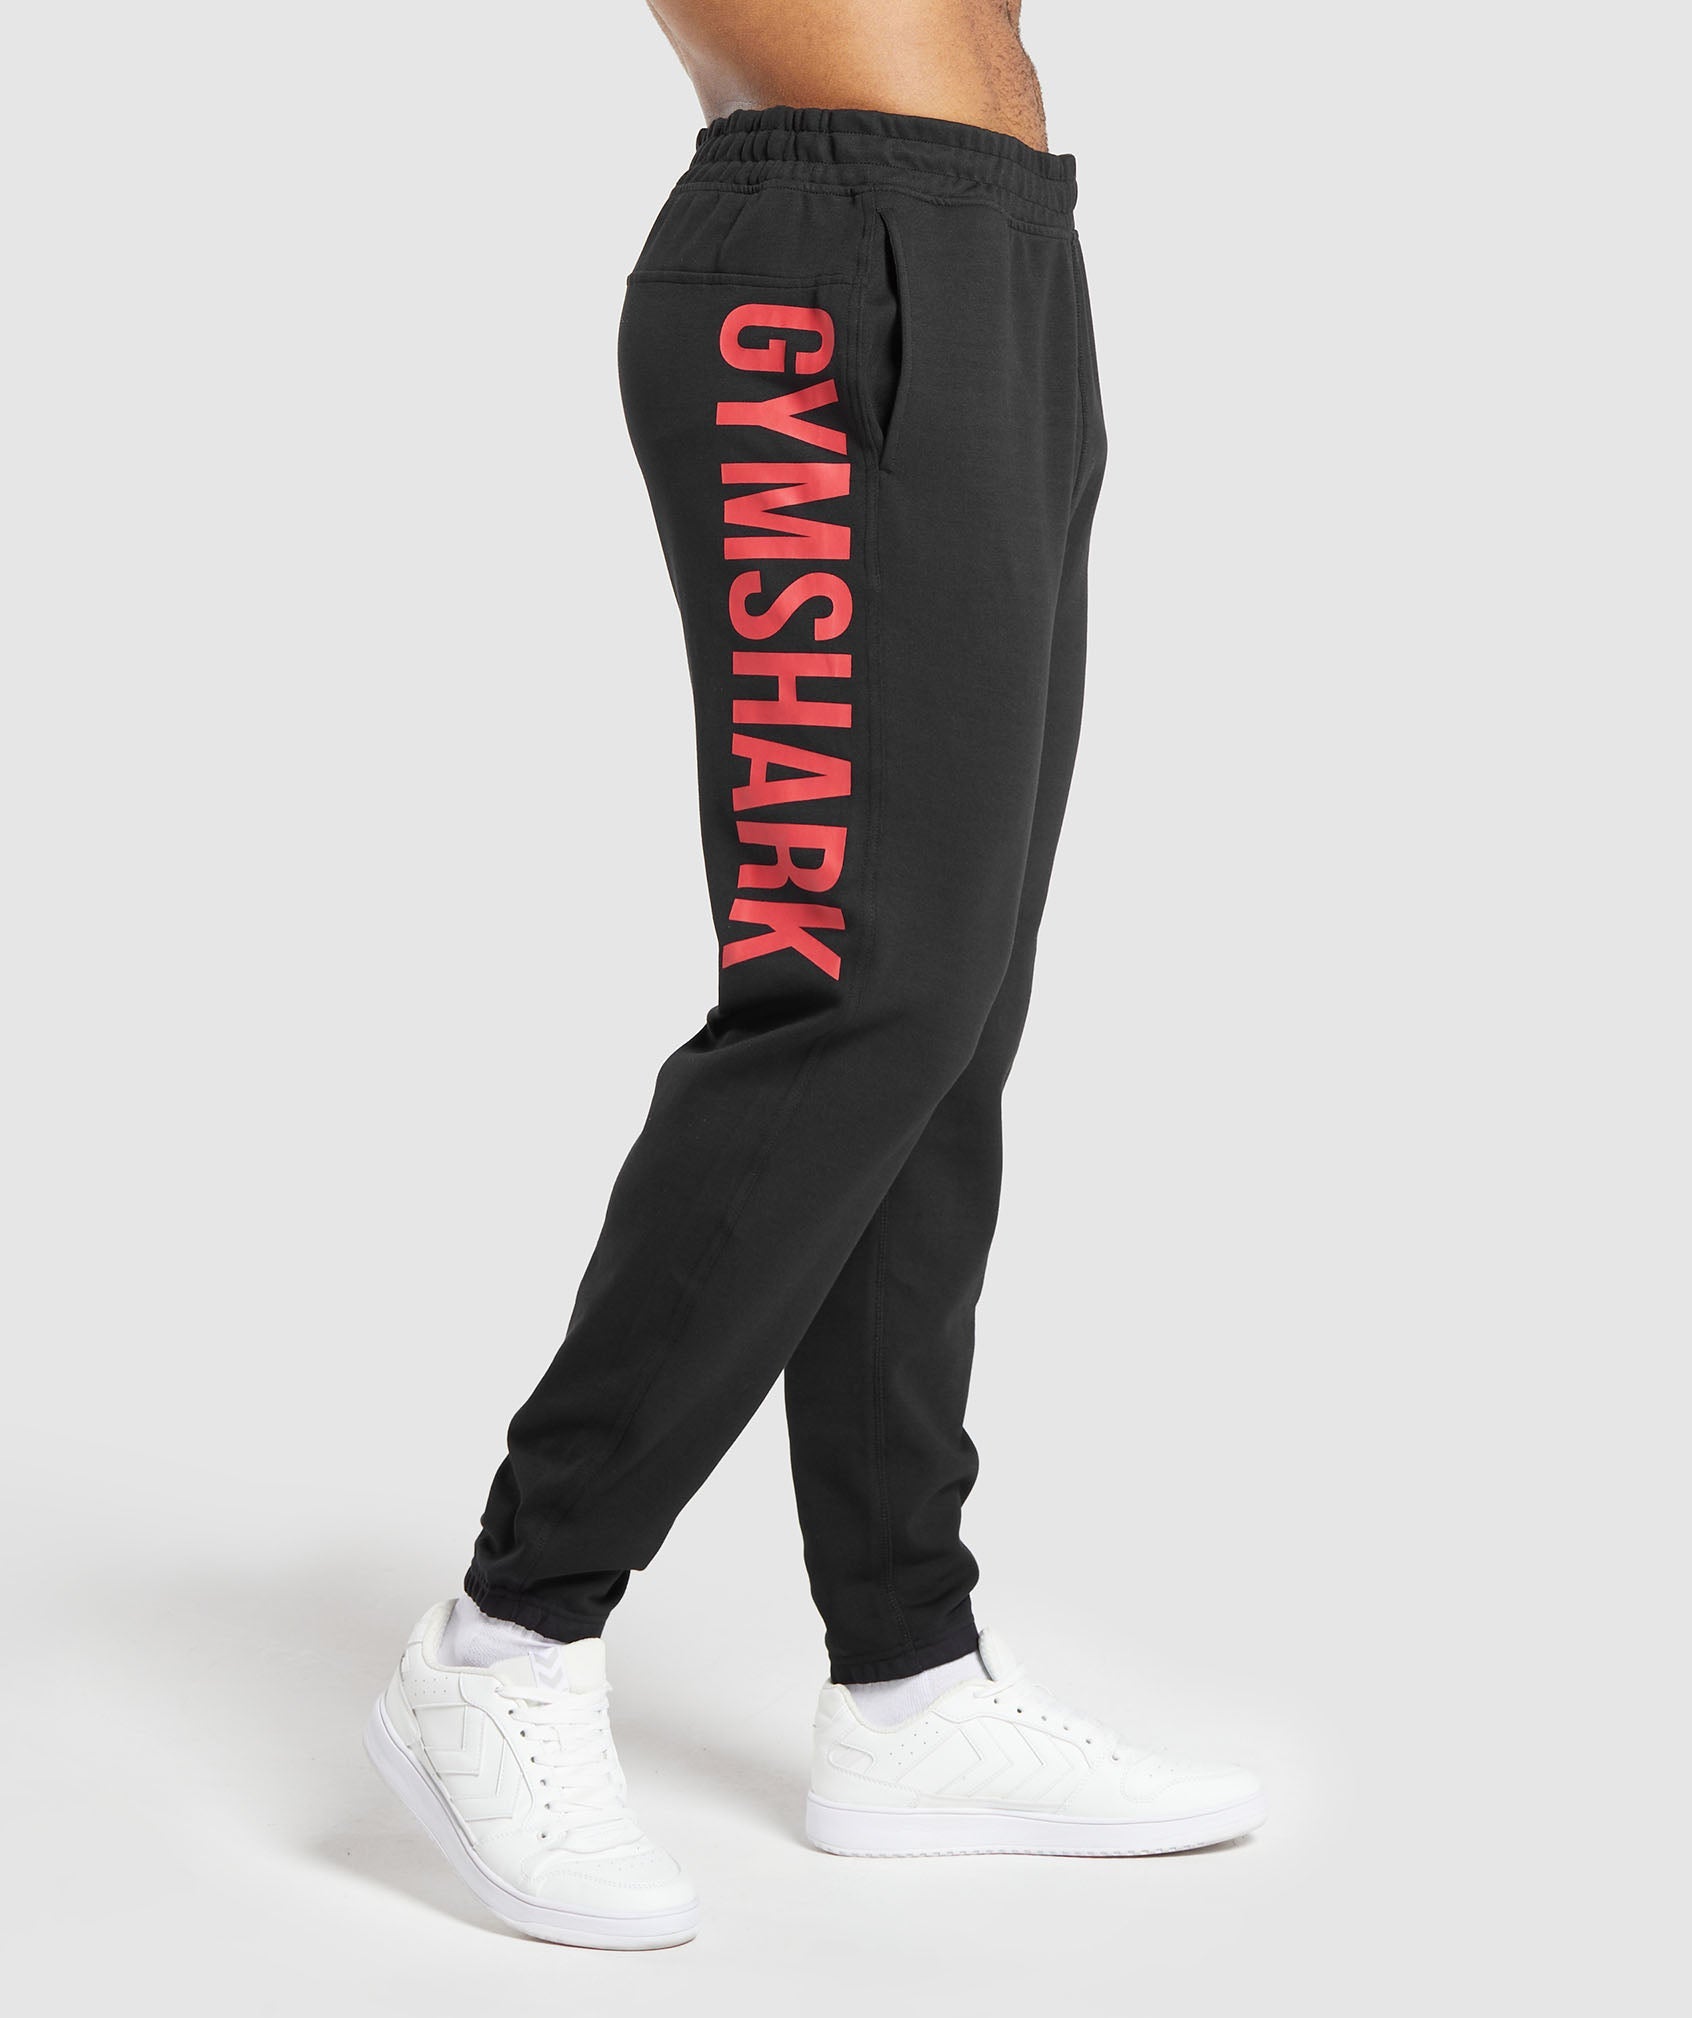 Impact Joggers in Black/Vivid Red